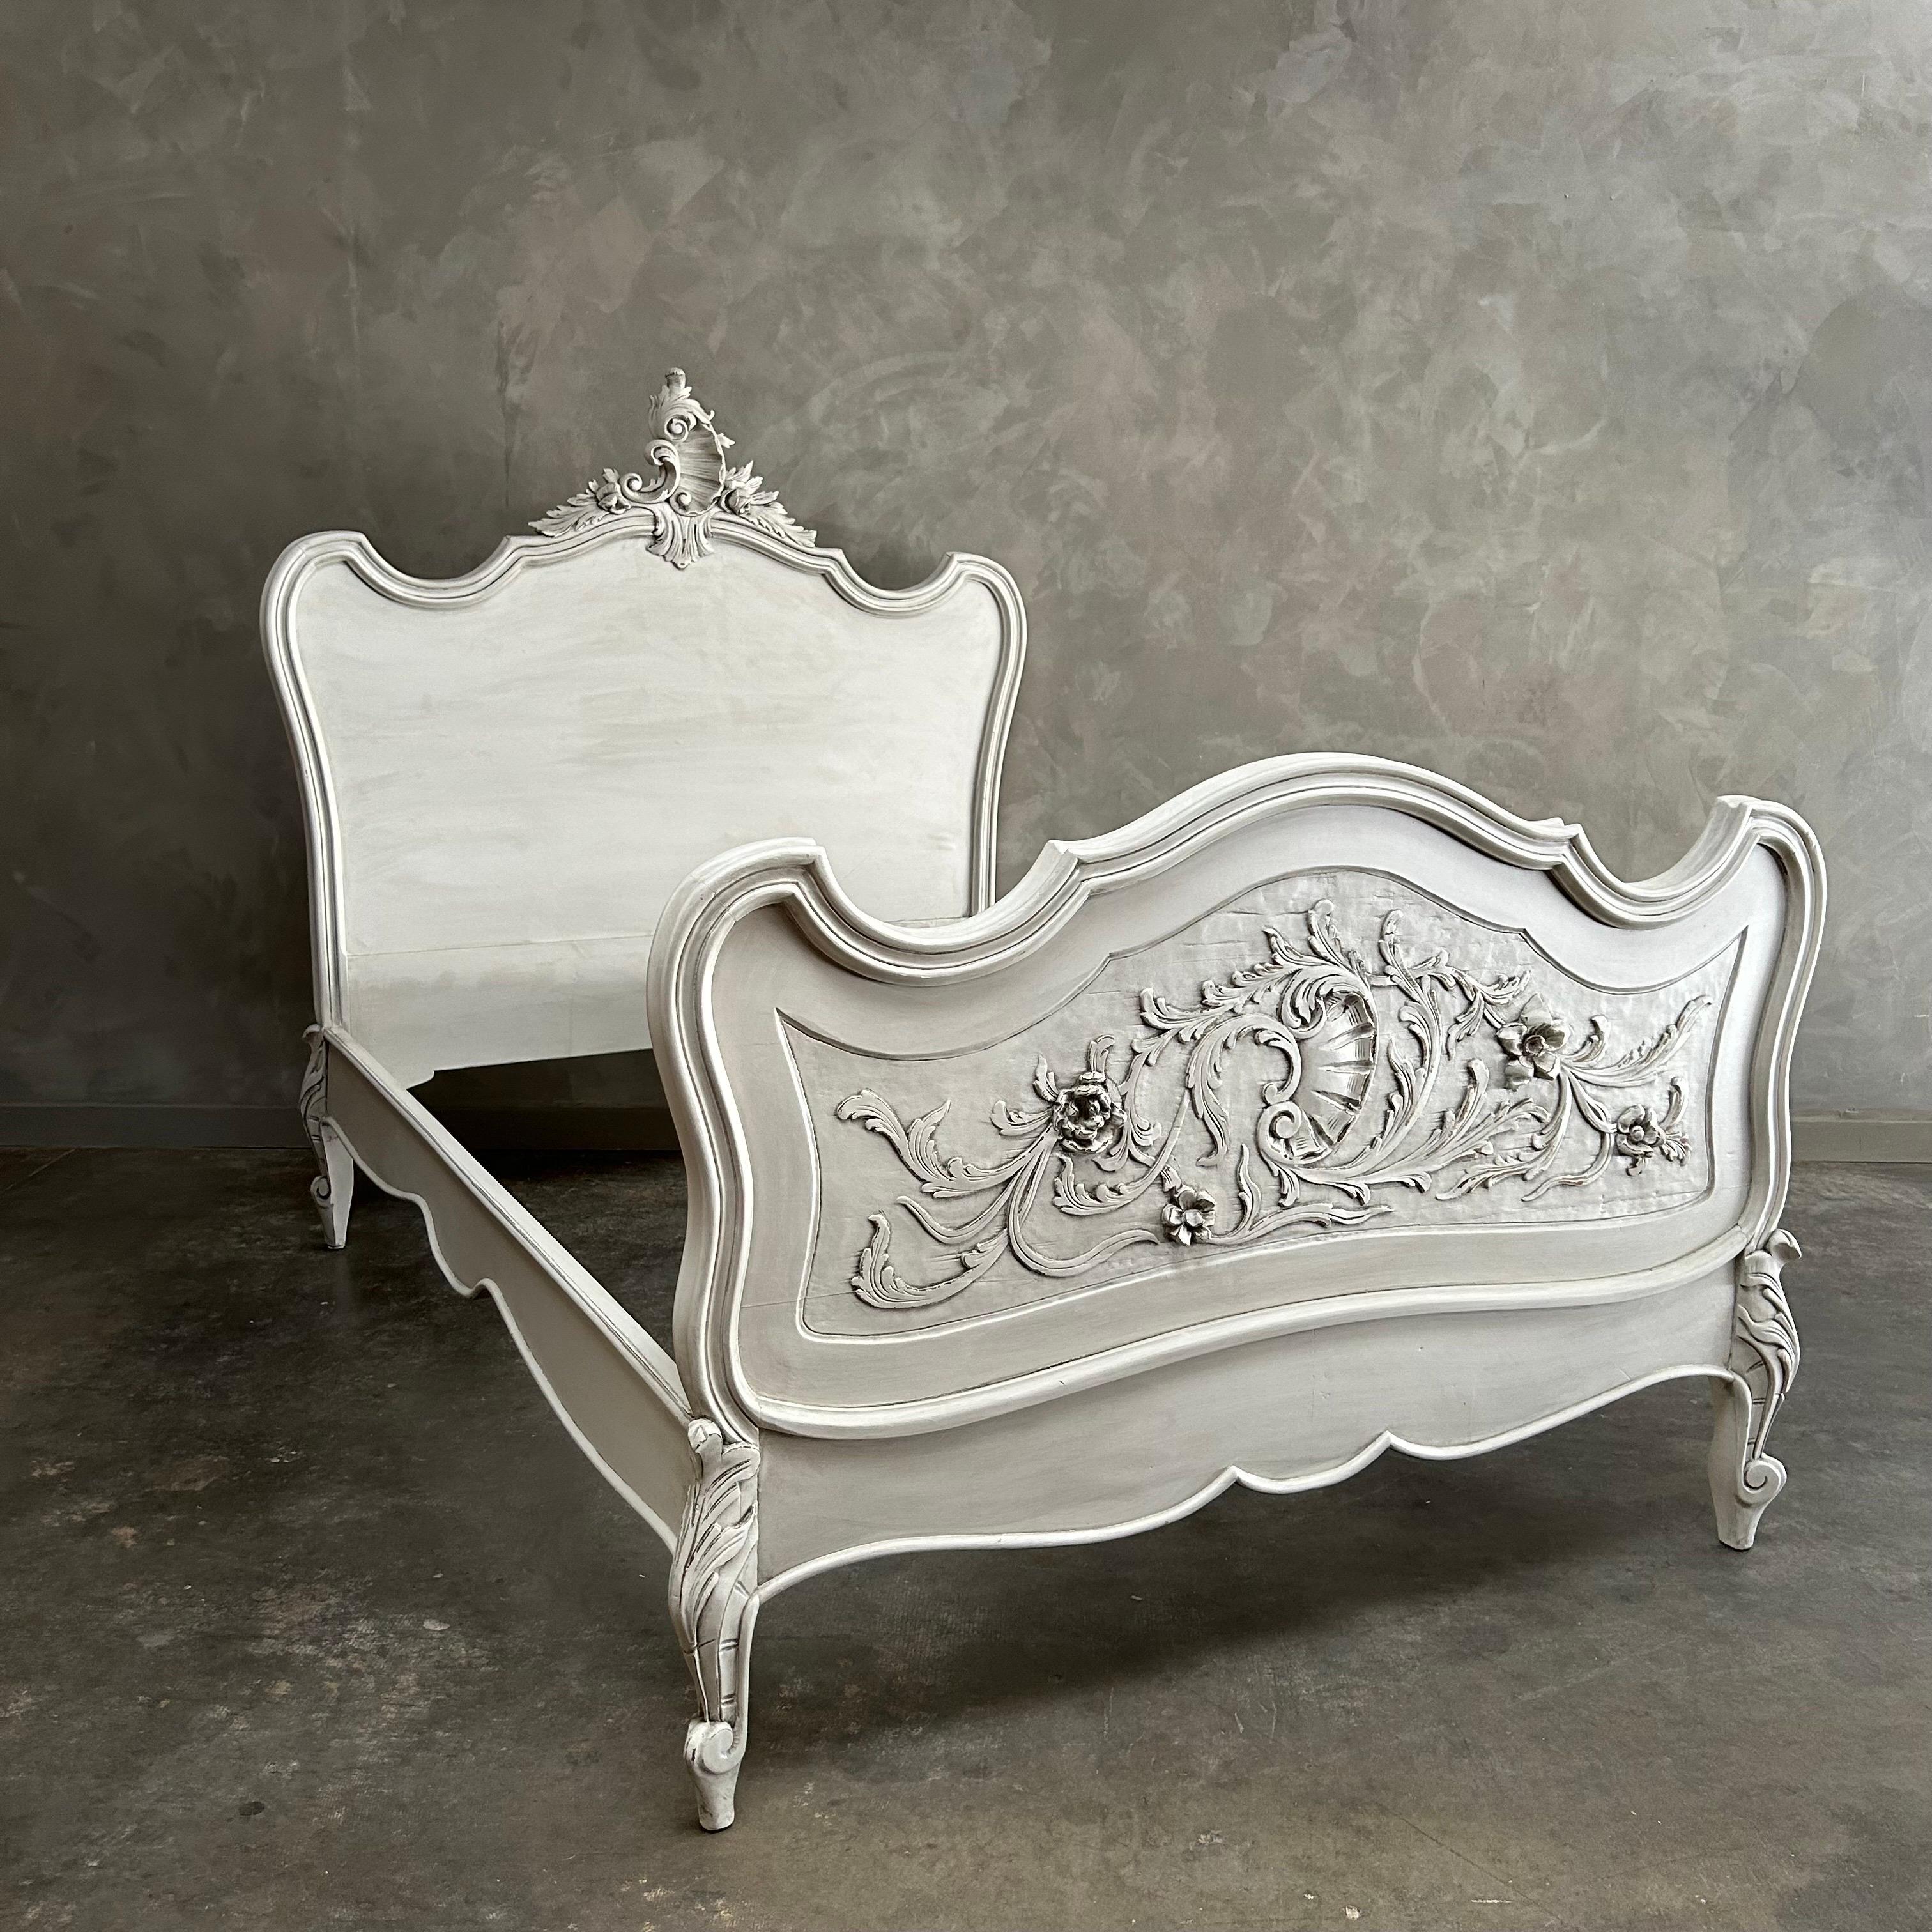 Antique Carved french bed 
Painted in a soft oyster white finish, with subtle distressed edges and antique glazed patina.
Dimensions: 58”w x 80”d x 62”h
Footboard: 39”h. 
Inside: 50.5”w x 76”d
Solid and sturdy when assembled, fits a custom size